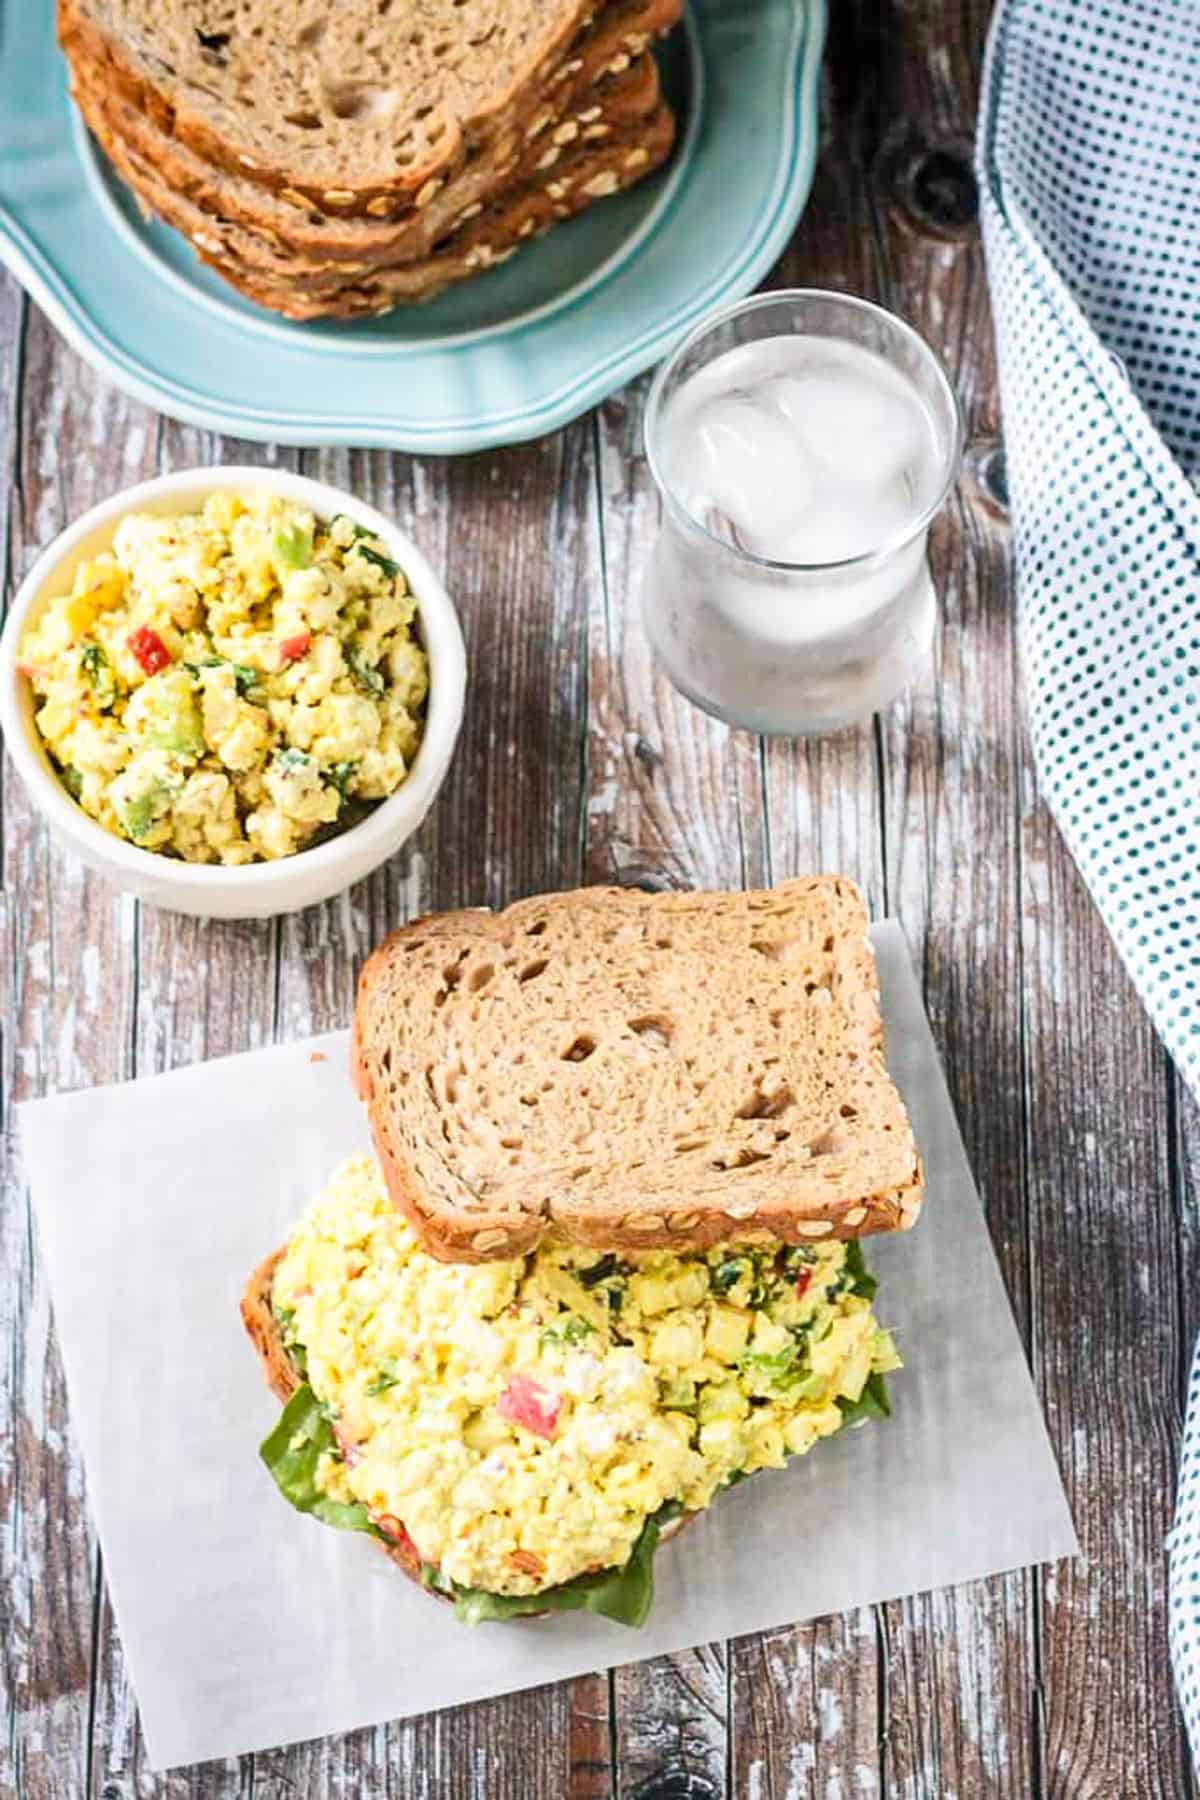 Vegan egg salad on whole grain bread with glass of water behind.